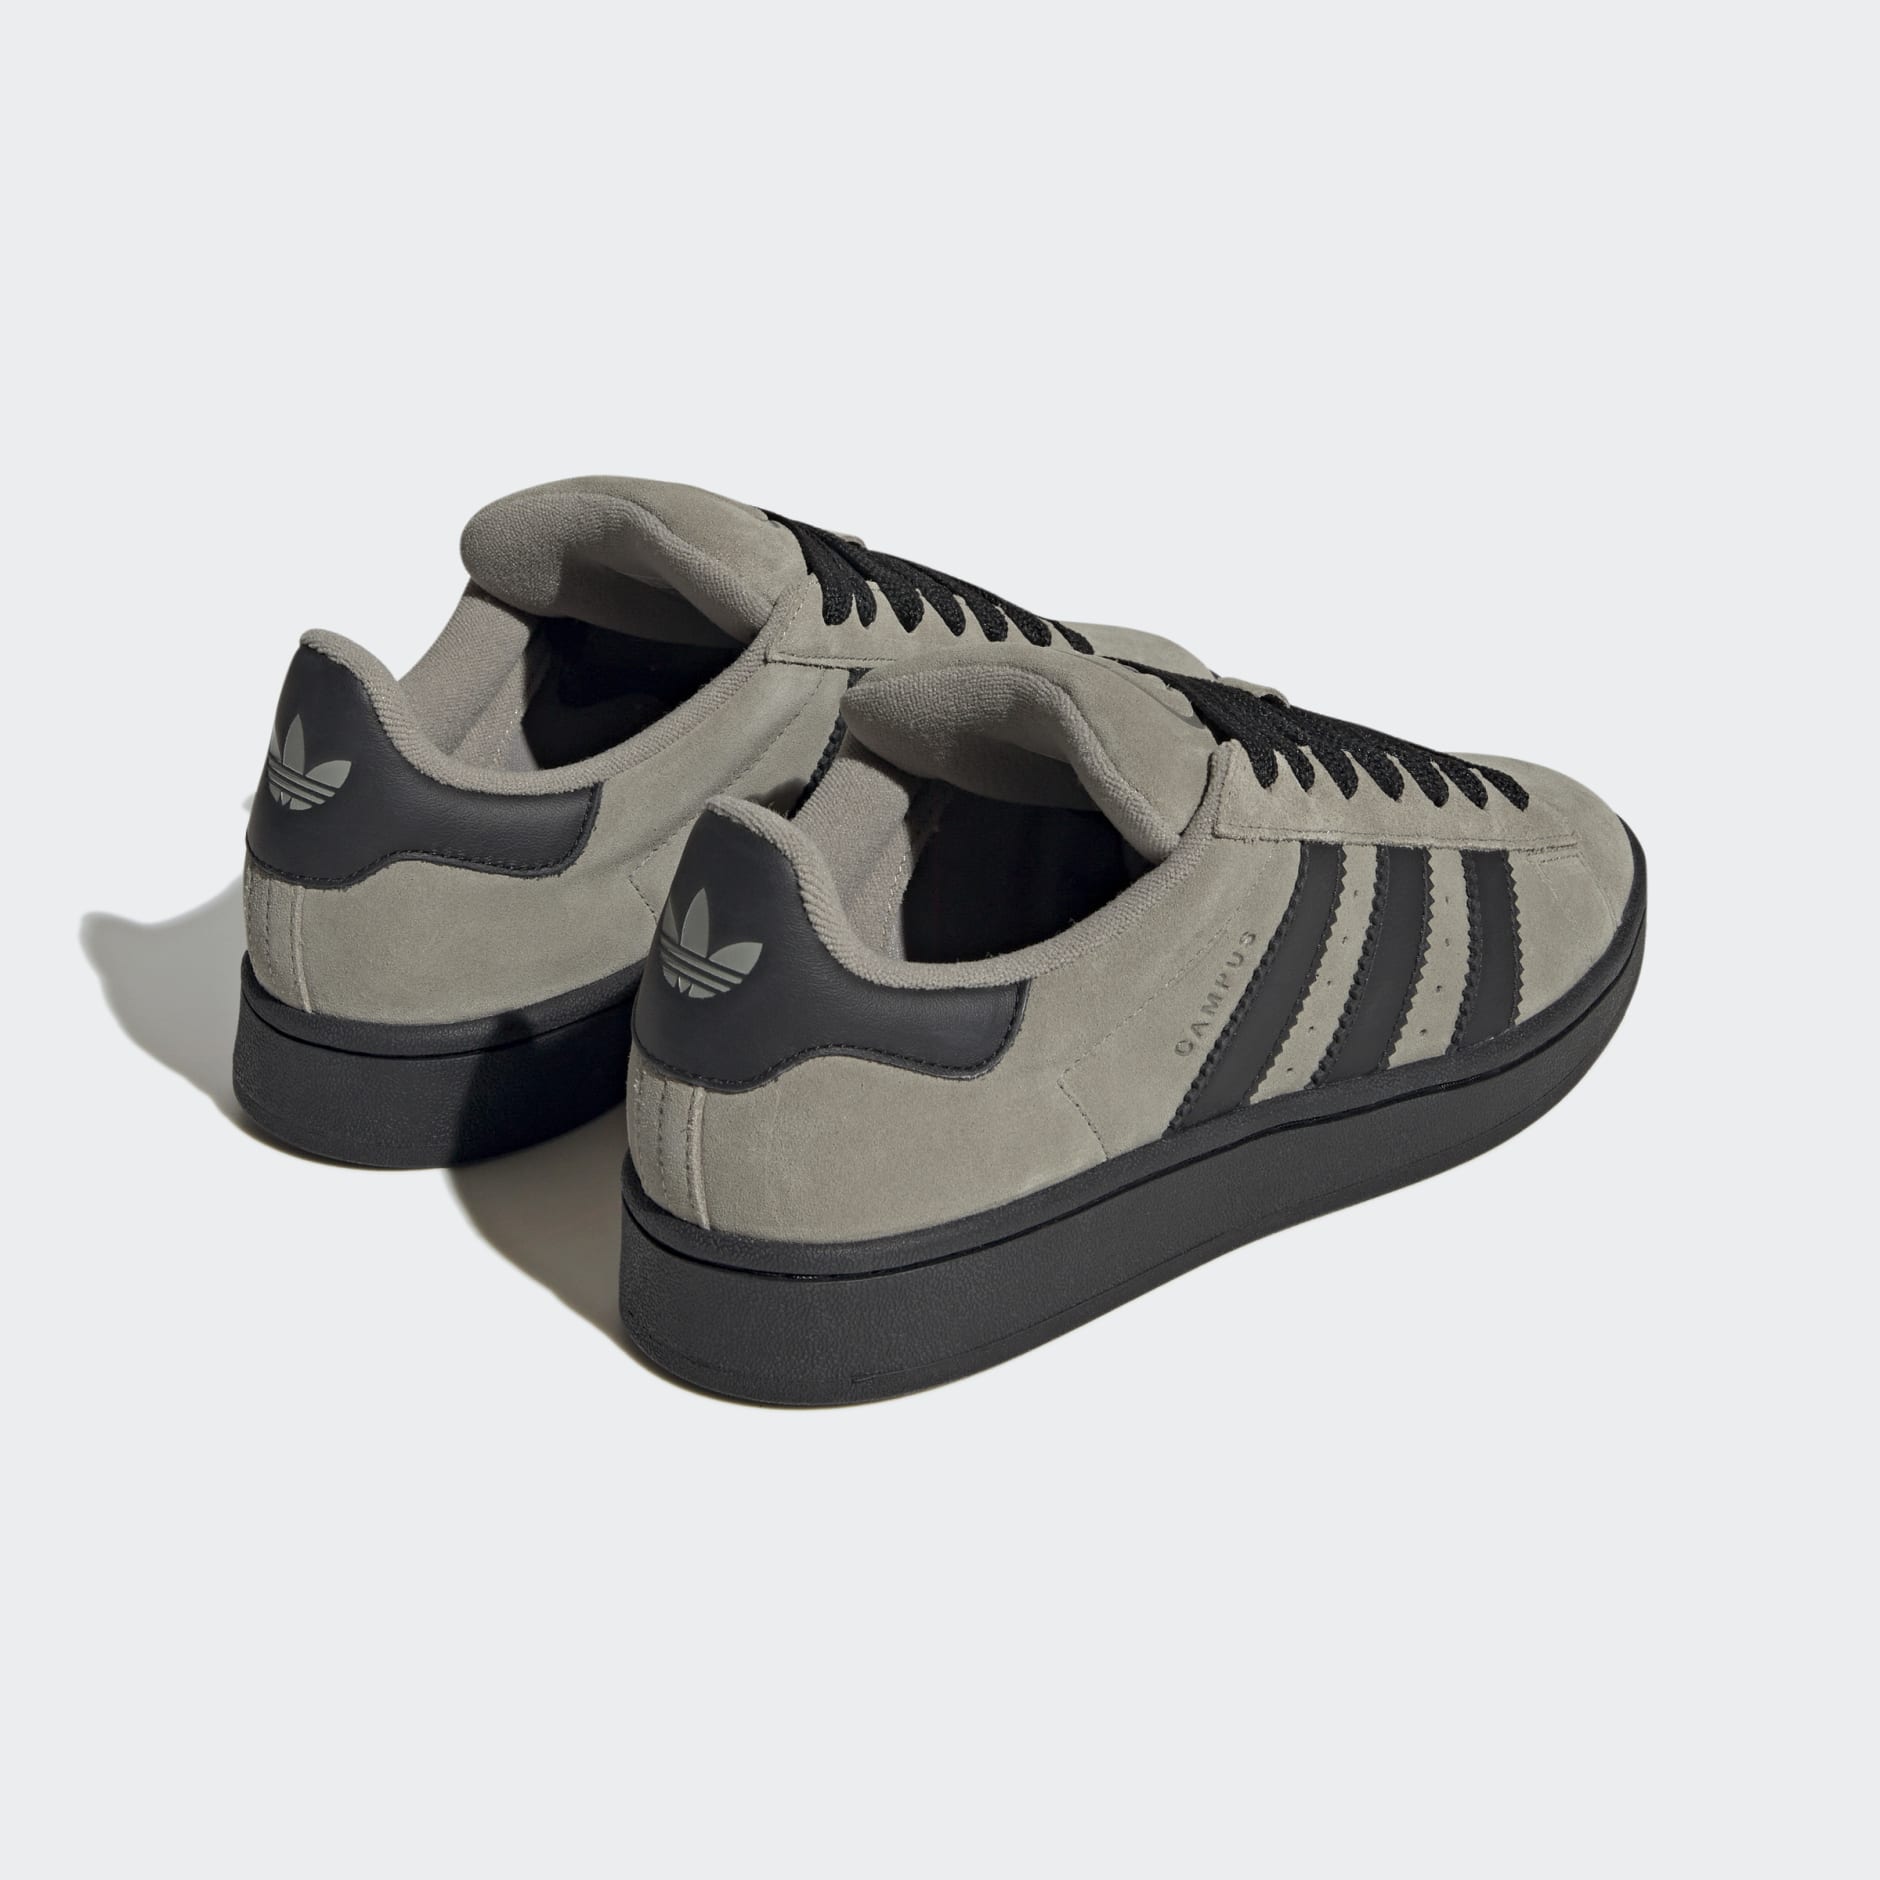 Men's Shoes - Campus 00s Shoes - Green | adidas Qatar